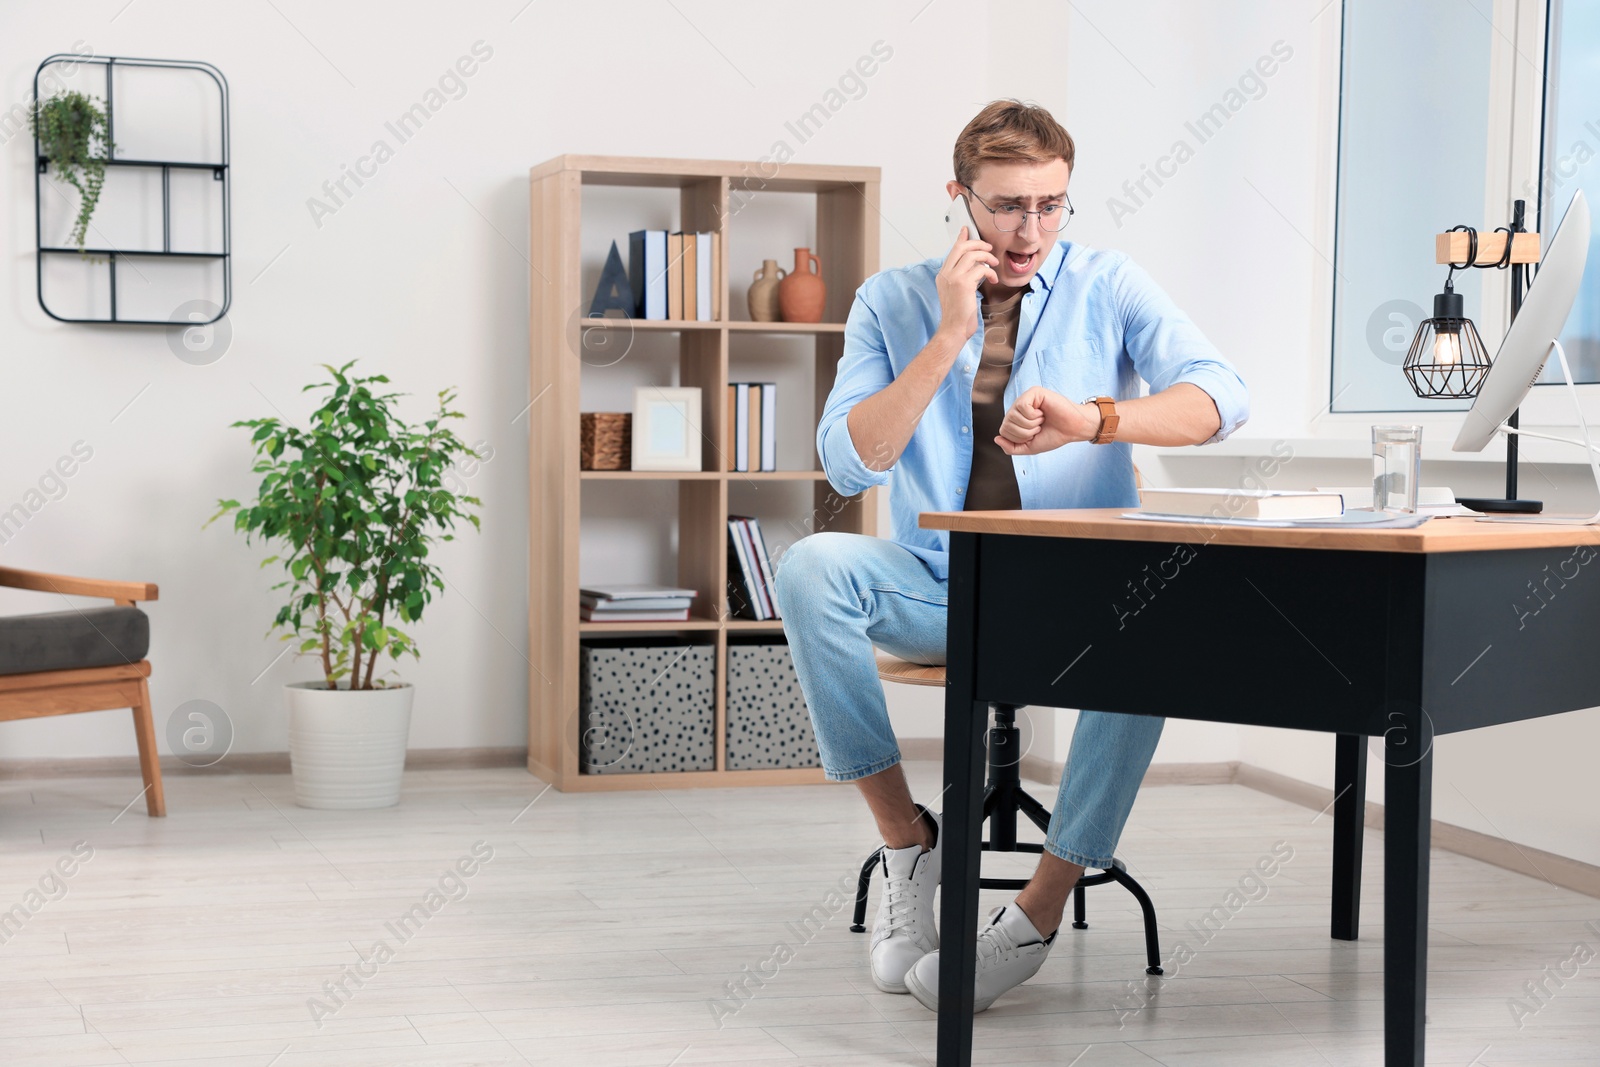 Photo of Emotional young man checking time while talking on phone in office. Being late